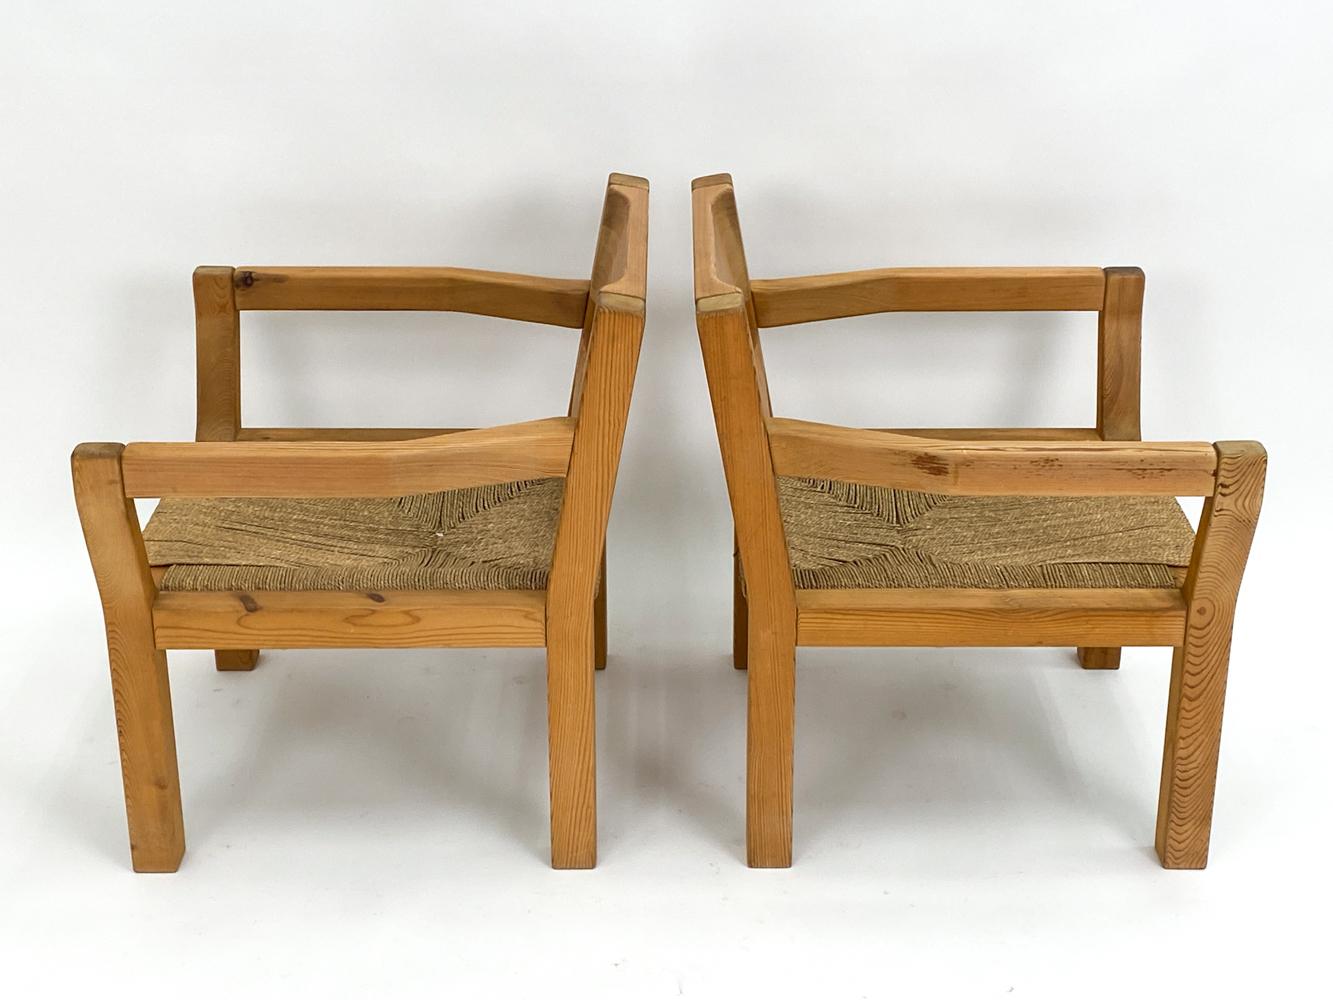 Pair of Tage Poulsen Pine & Rush Seat Lounge Chairs, c. 1970's For Sale 4